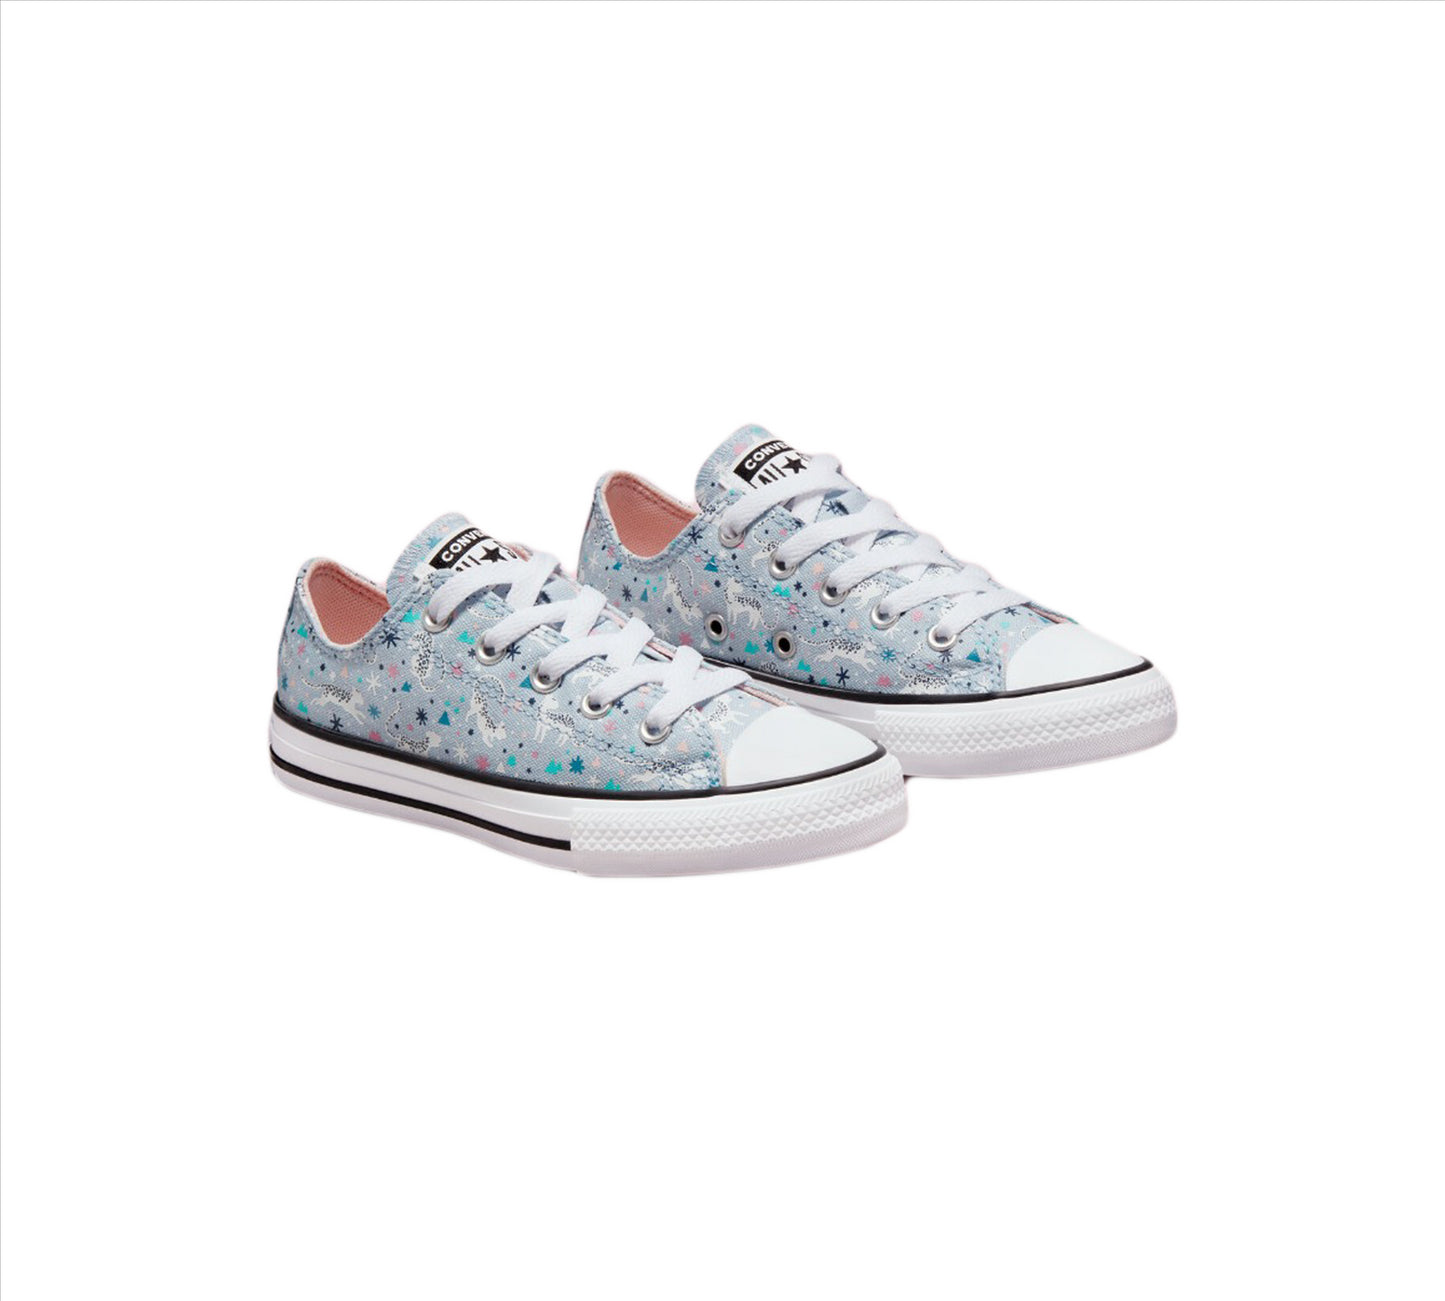 Converse Snowy Chuck Taylor Junior All Star Shoes